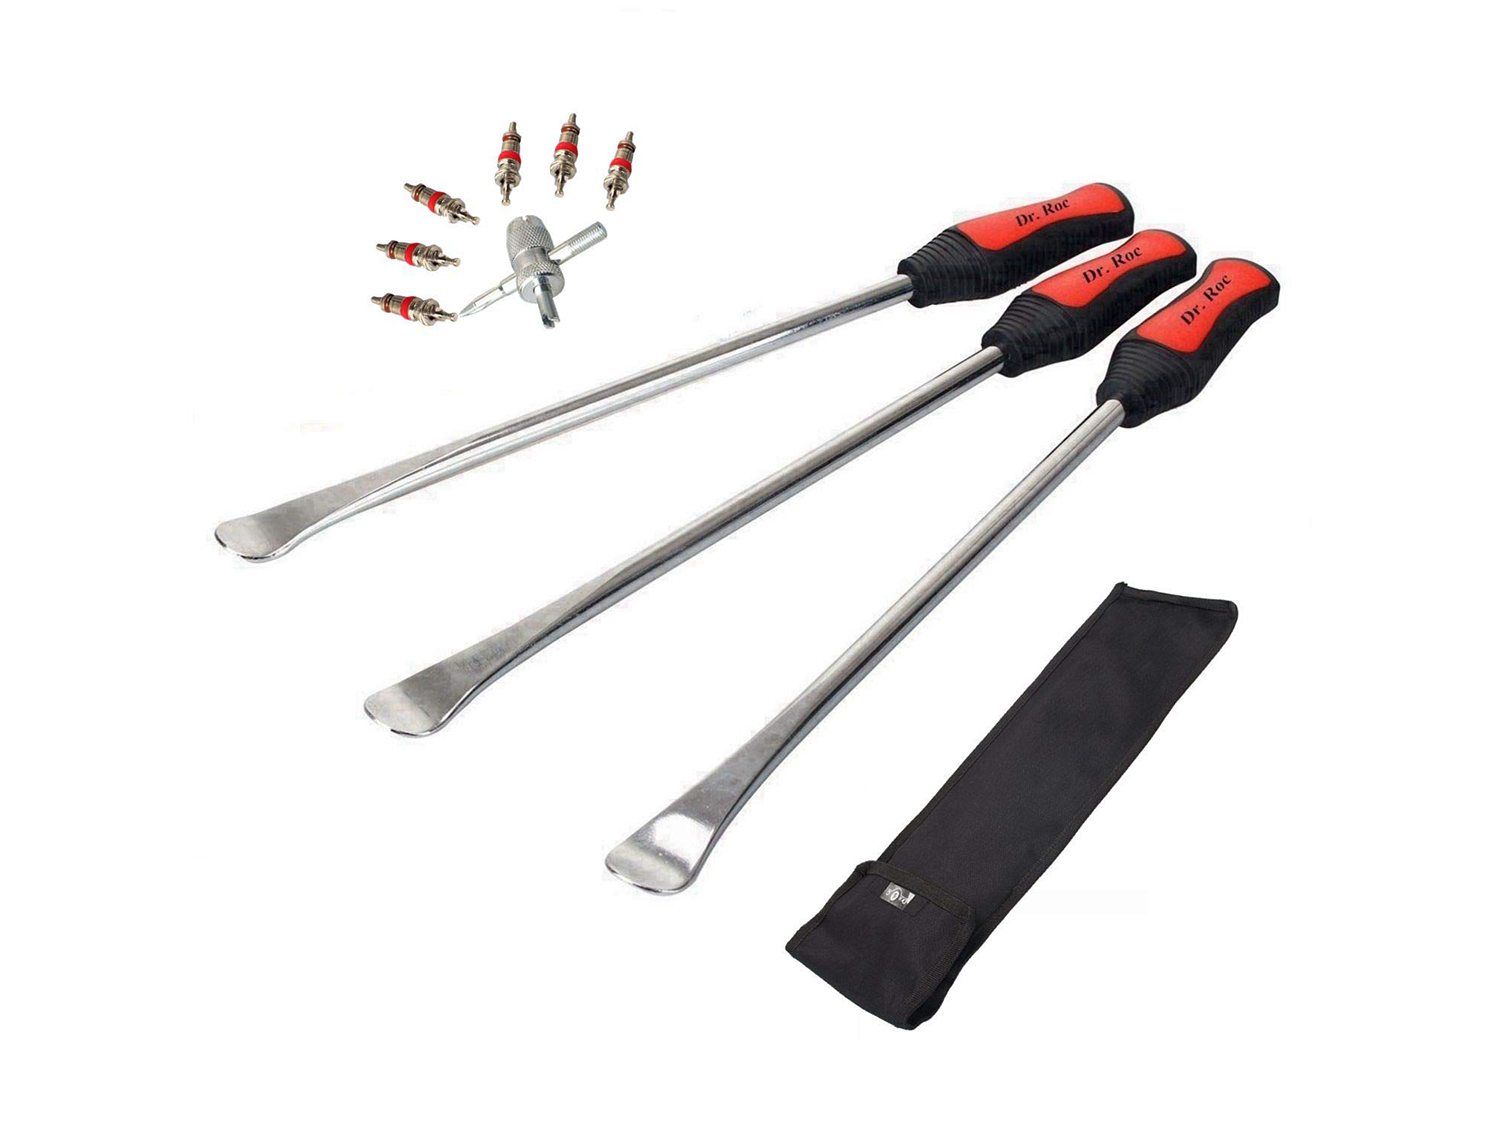 3pcs Tire Lever Spoon Iron Tool Motorcycle Bike Tire Changing Kits Case 